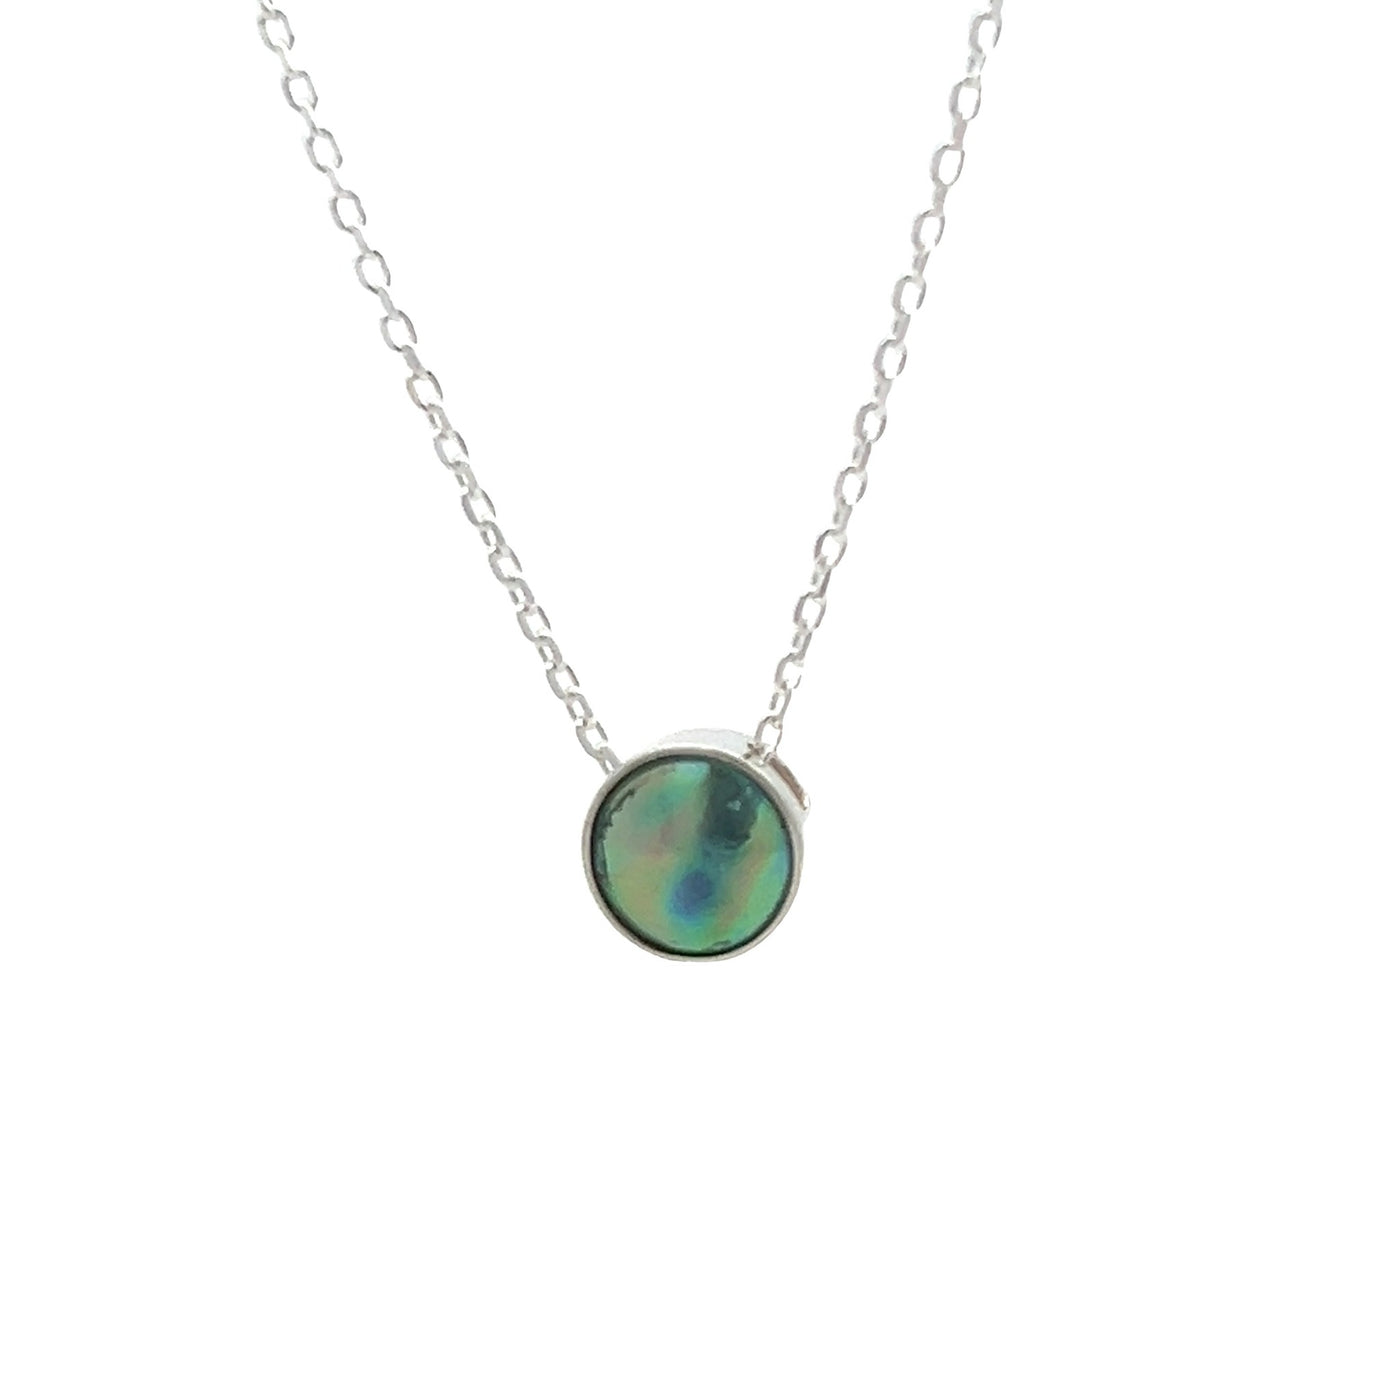 Pearl Moonrise Necklace - STG